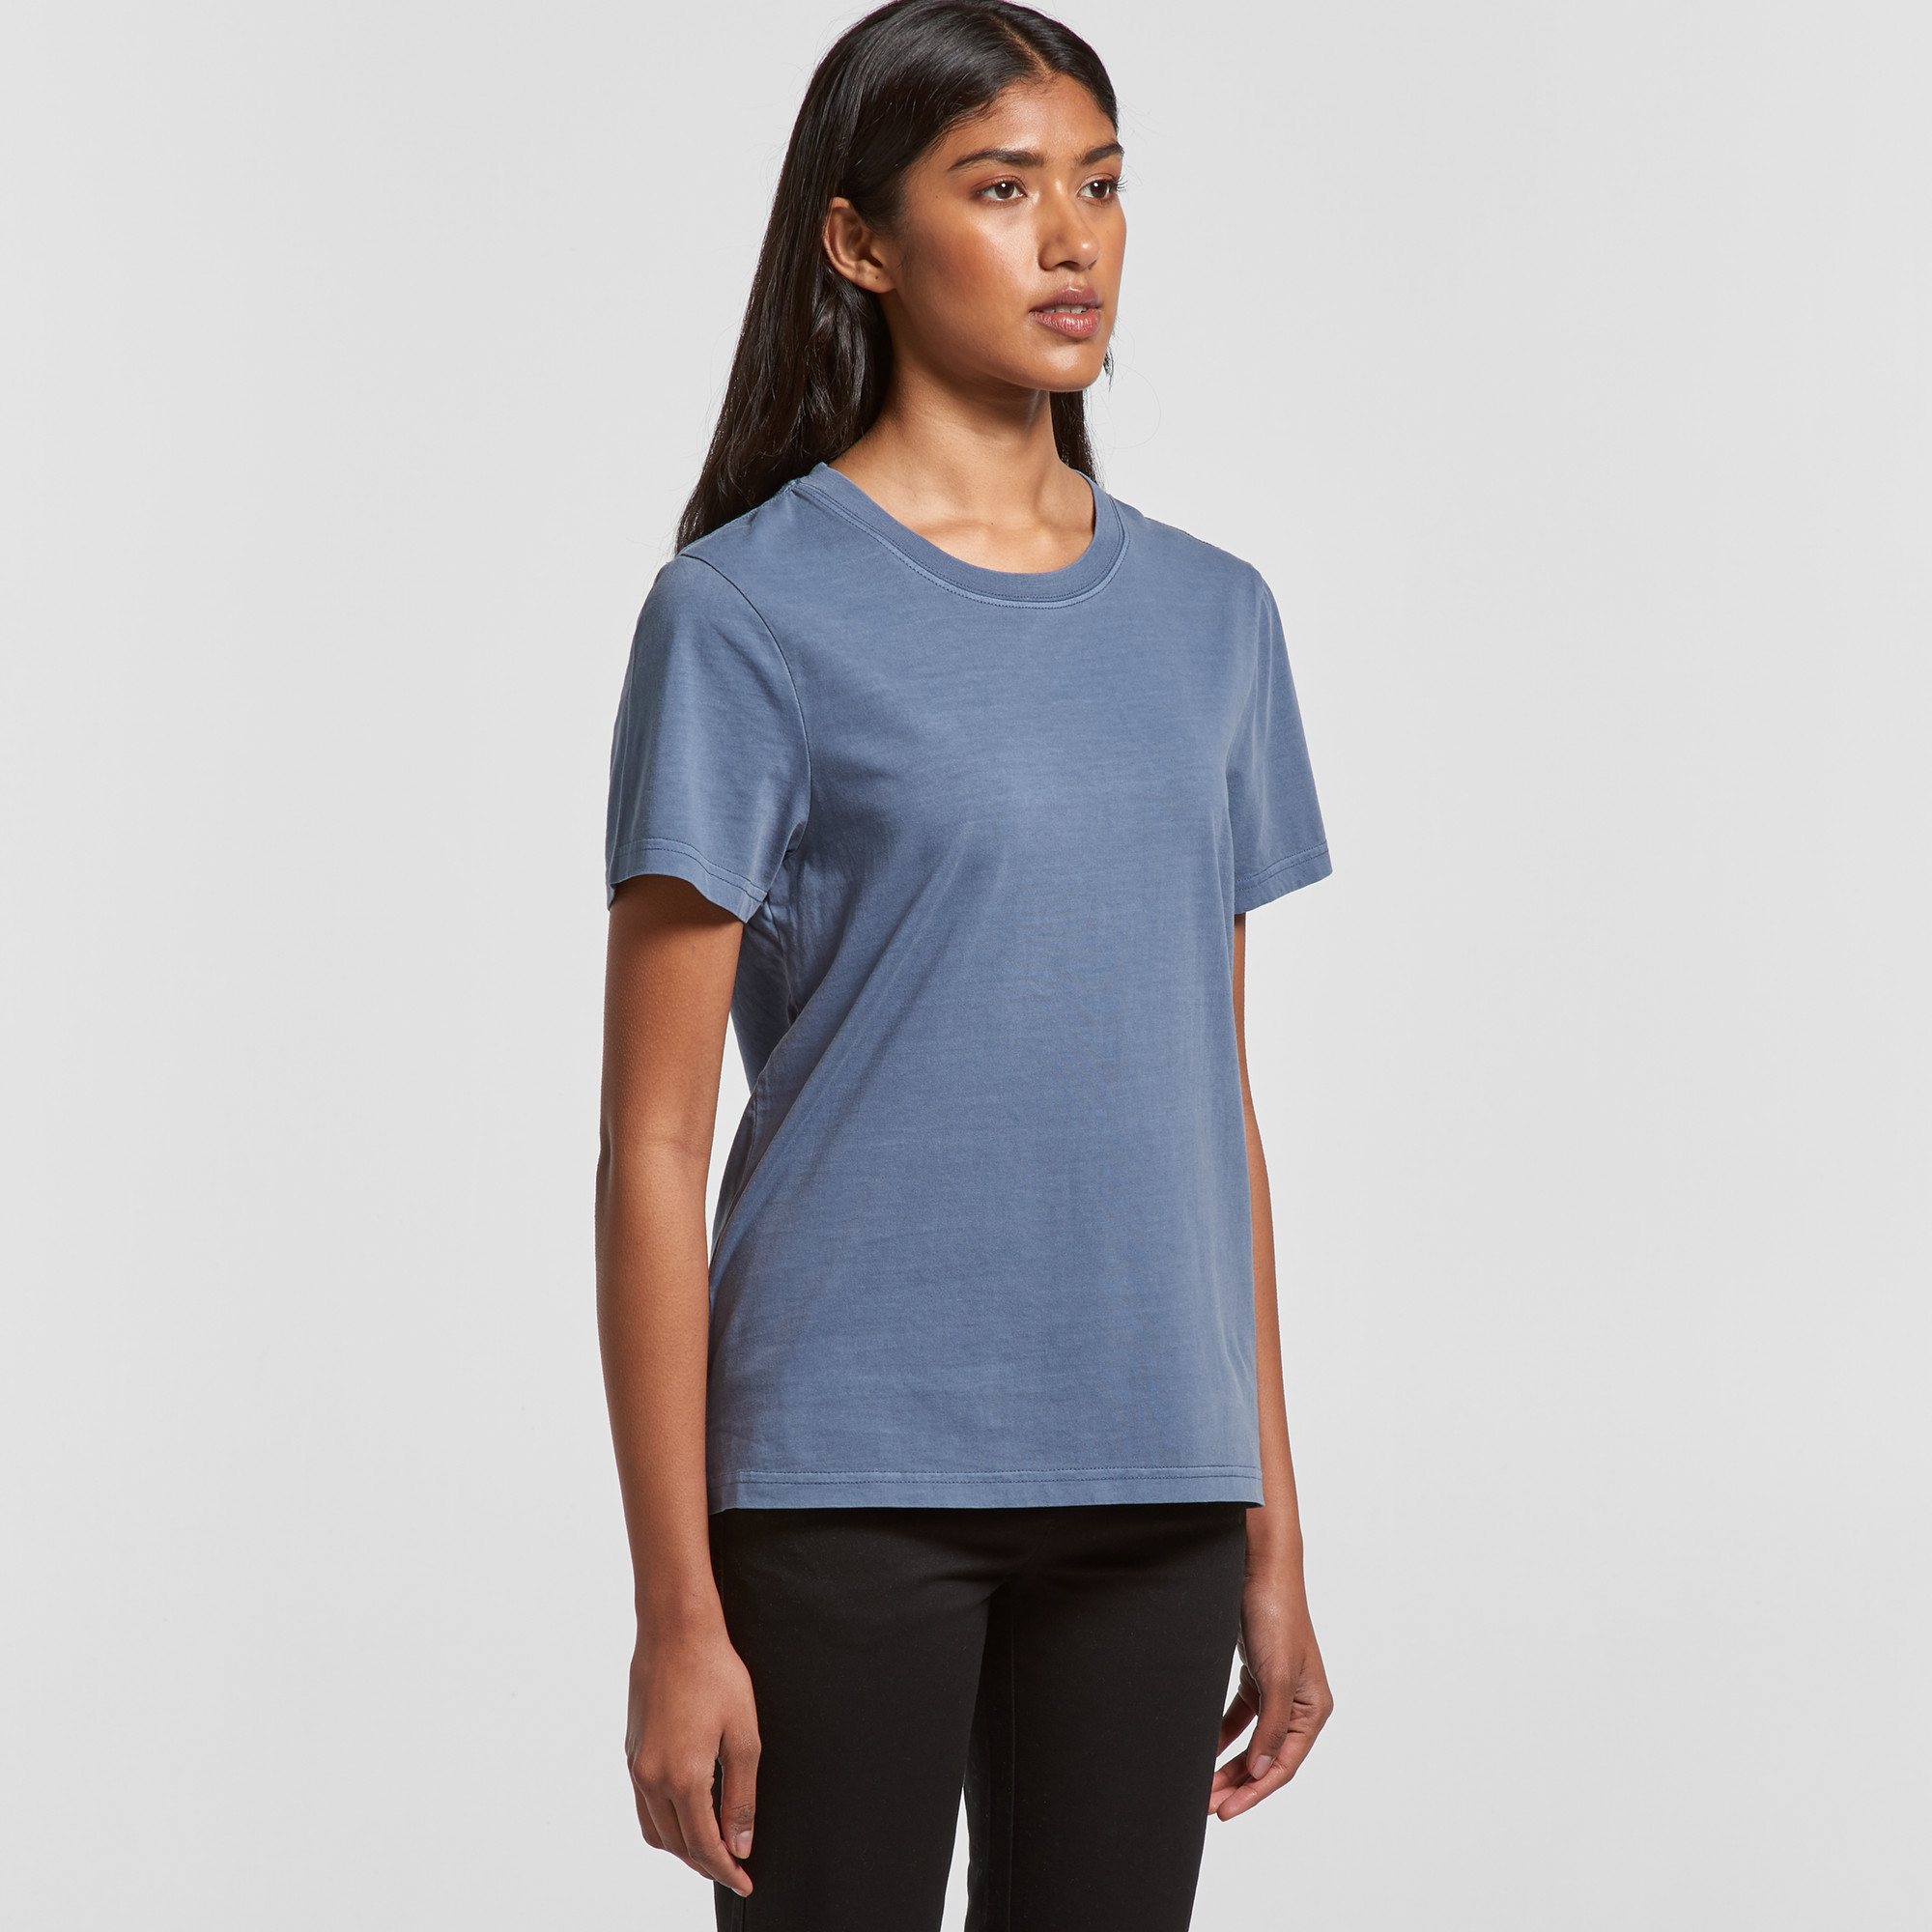 Wo's Maple Faded Tee - 4065 - AS Colour NZ